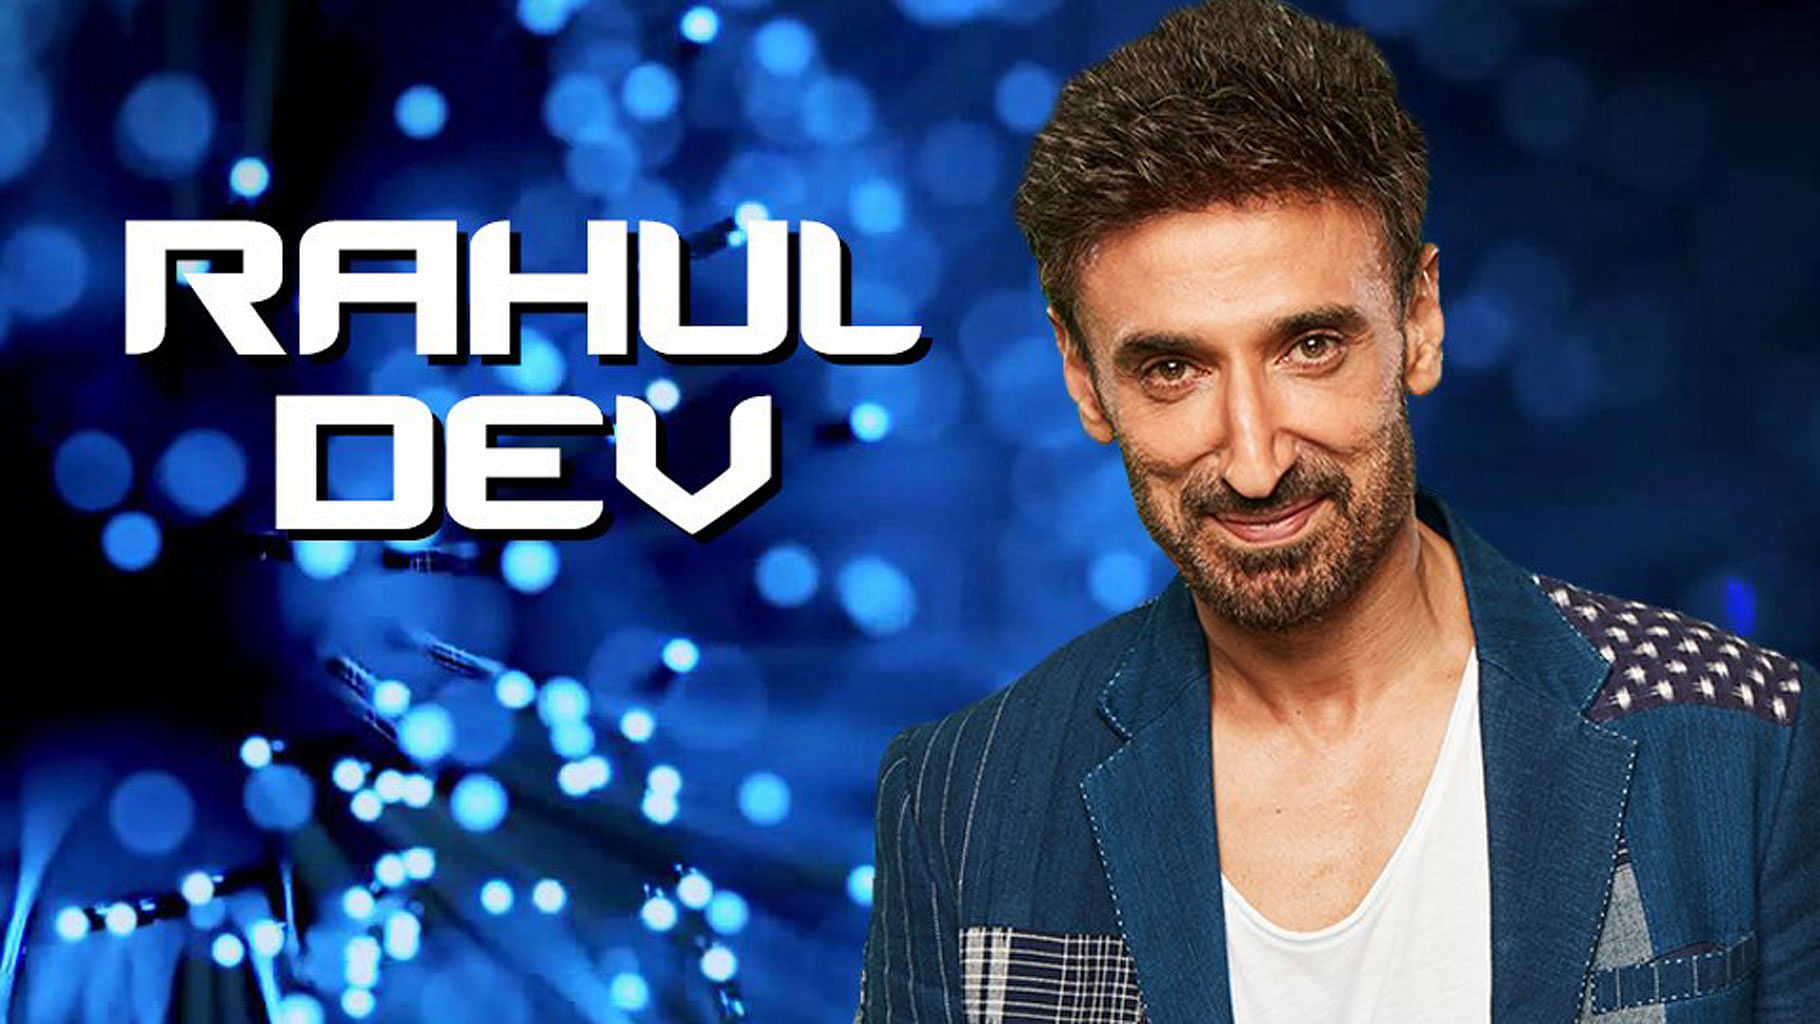 Actor Rahul Dev is now in the Bigg Boss house. (Photo courtesy: Twitter)